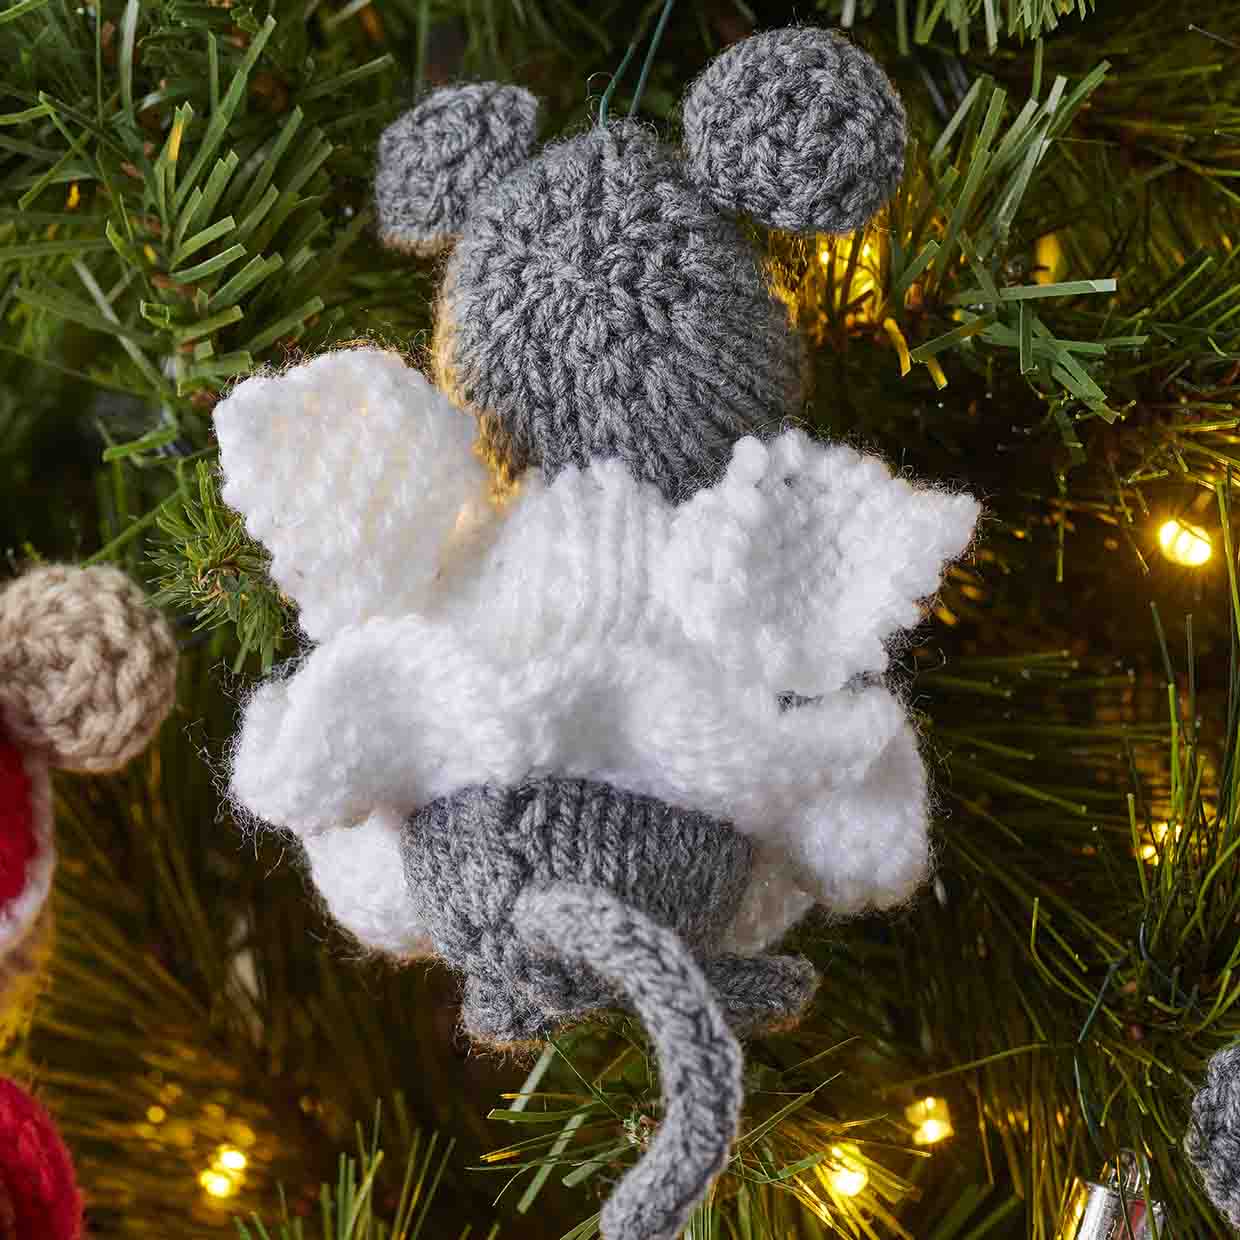 The Christmas mouse is dressed as a fairy and seen from behind so that her knitted wings attached to her body are seen and her long grey knitted tail